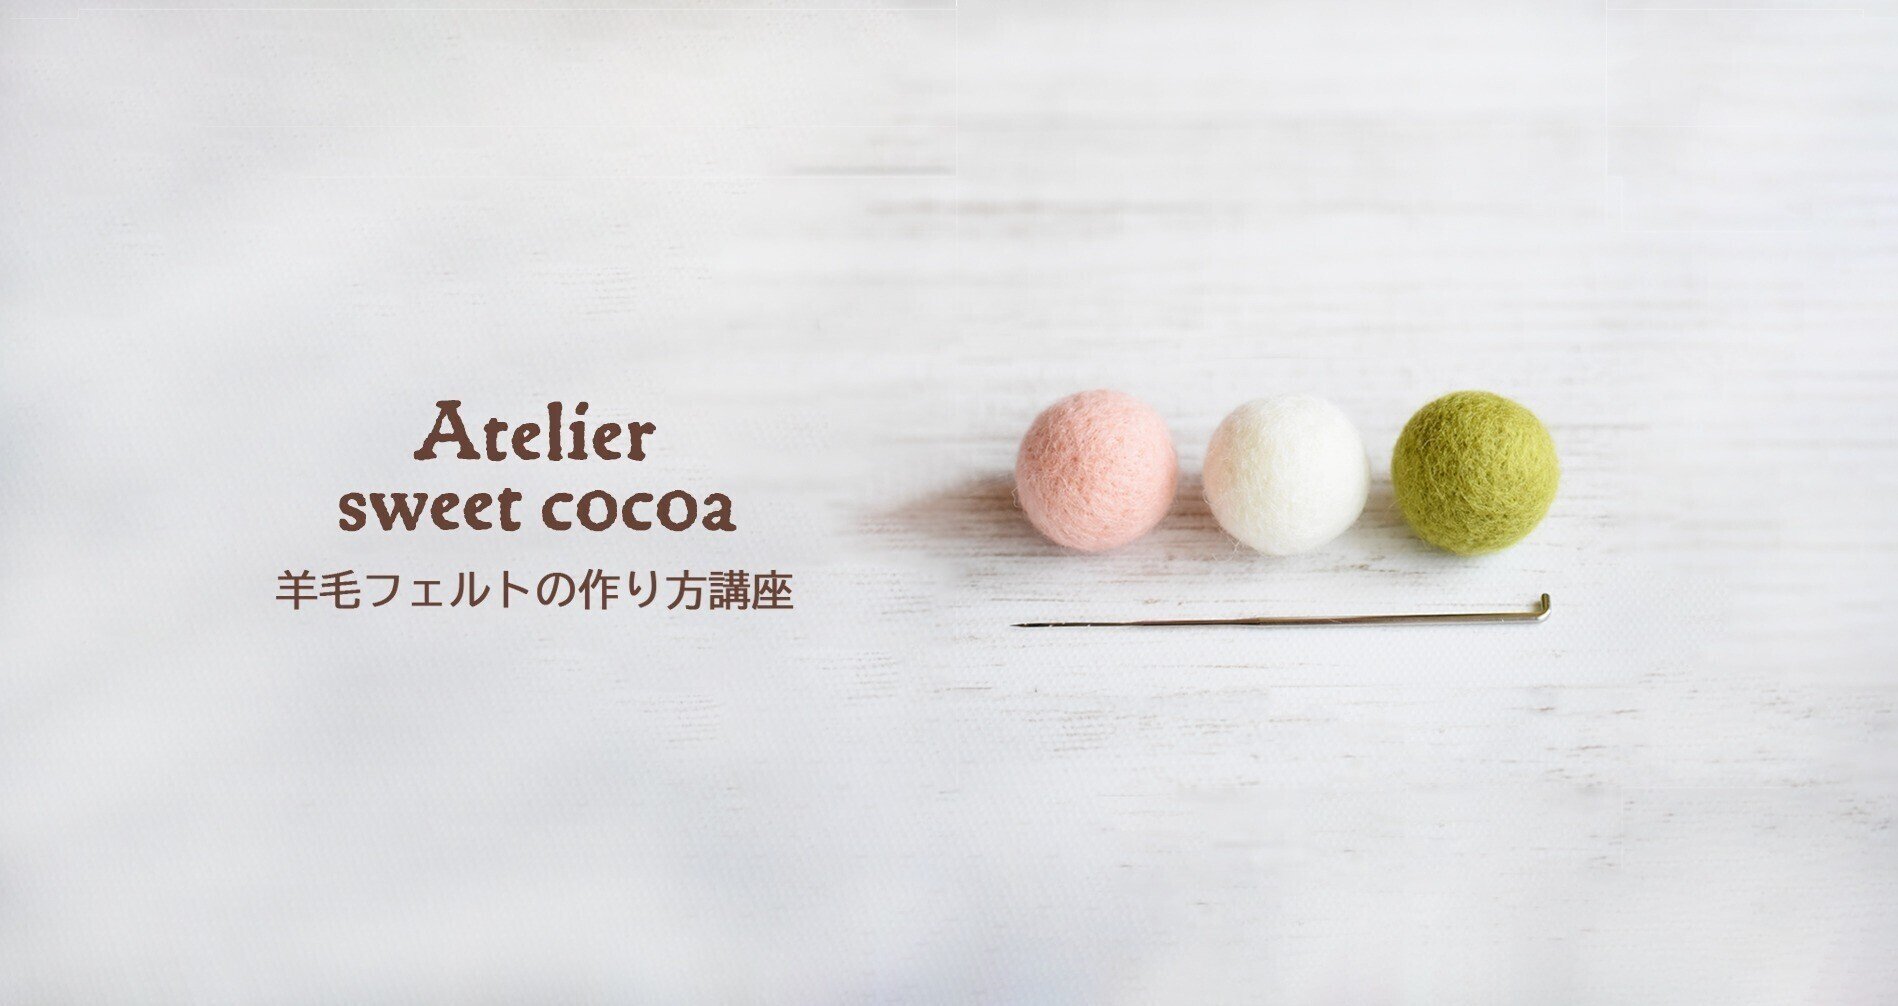 Atelier sweet cocoa 特別クラス